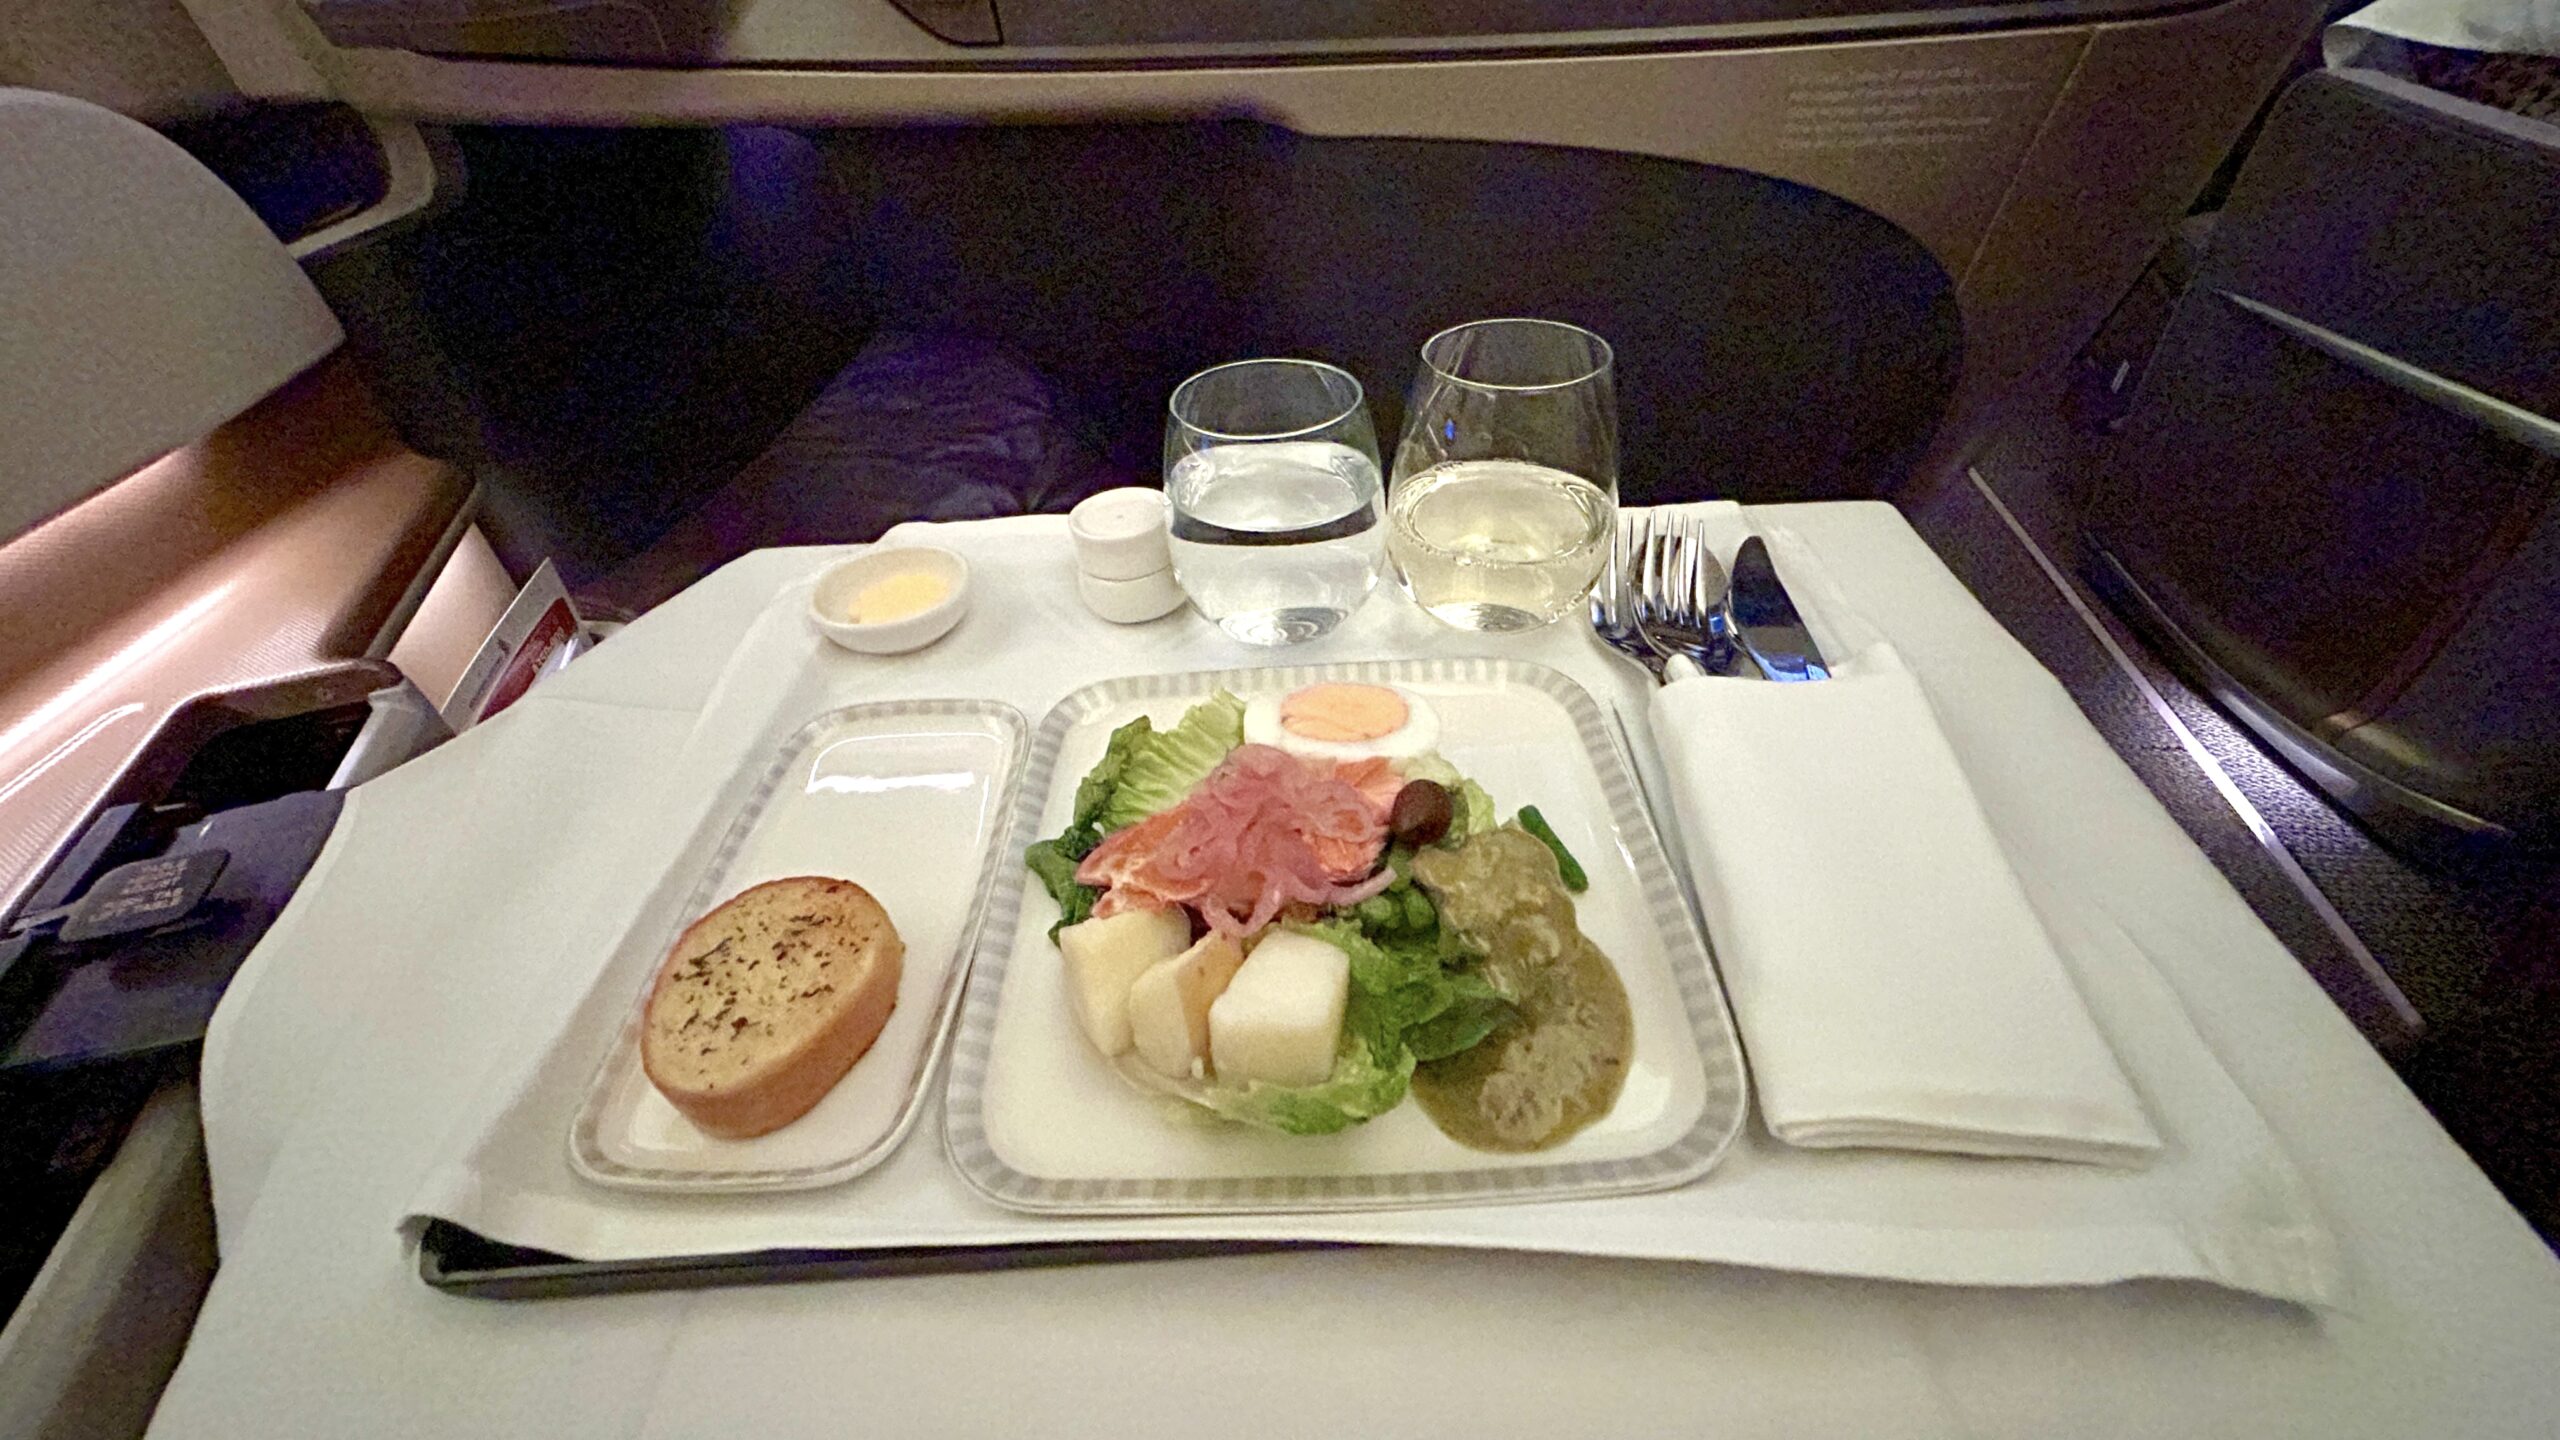 Singapore Airlines A350 Business Class Singapore to Brussels Hot Smoked Salmon Salad Entree Point Hacks by Daniel Sciberras